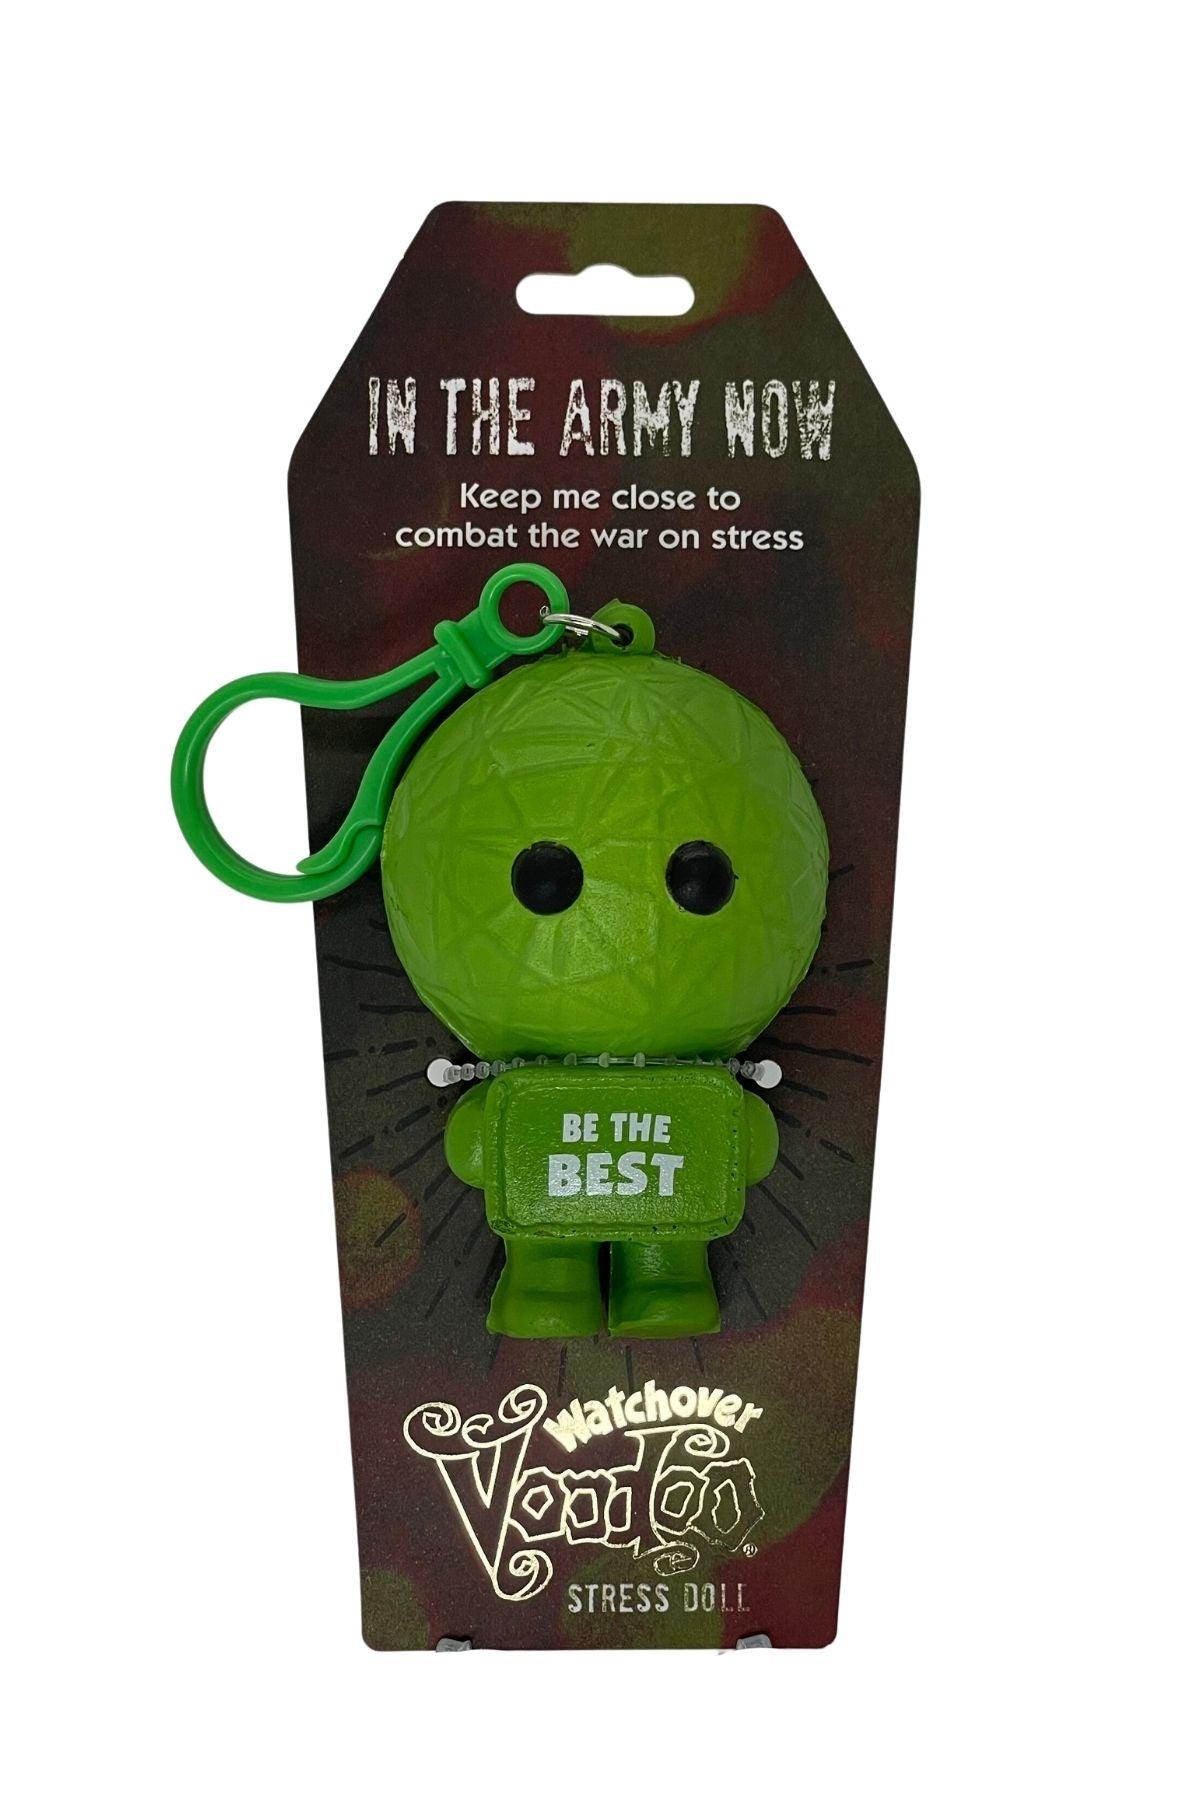 Voodoo Stress Doll - In The Army Now - Watchover Voodoo - Stress Doll